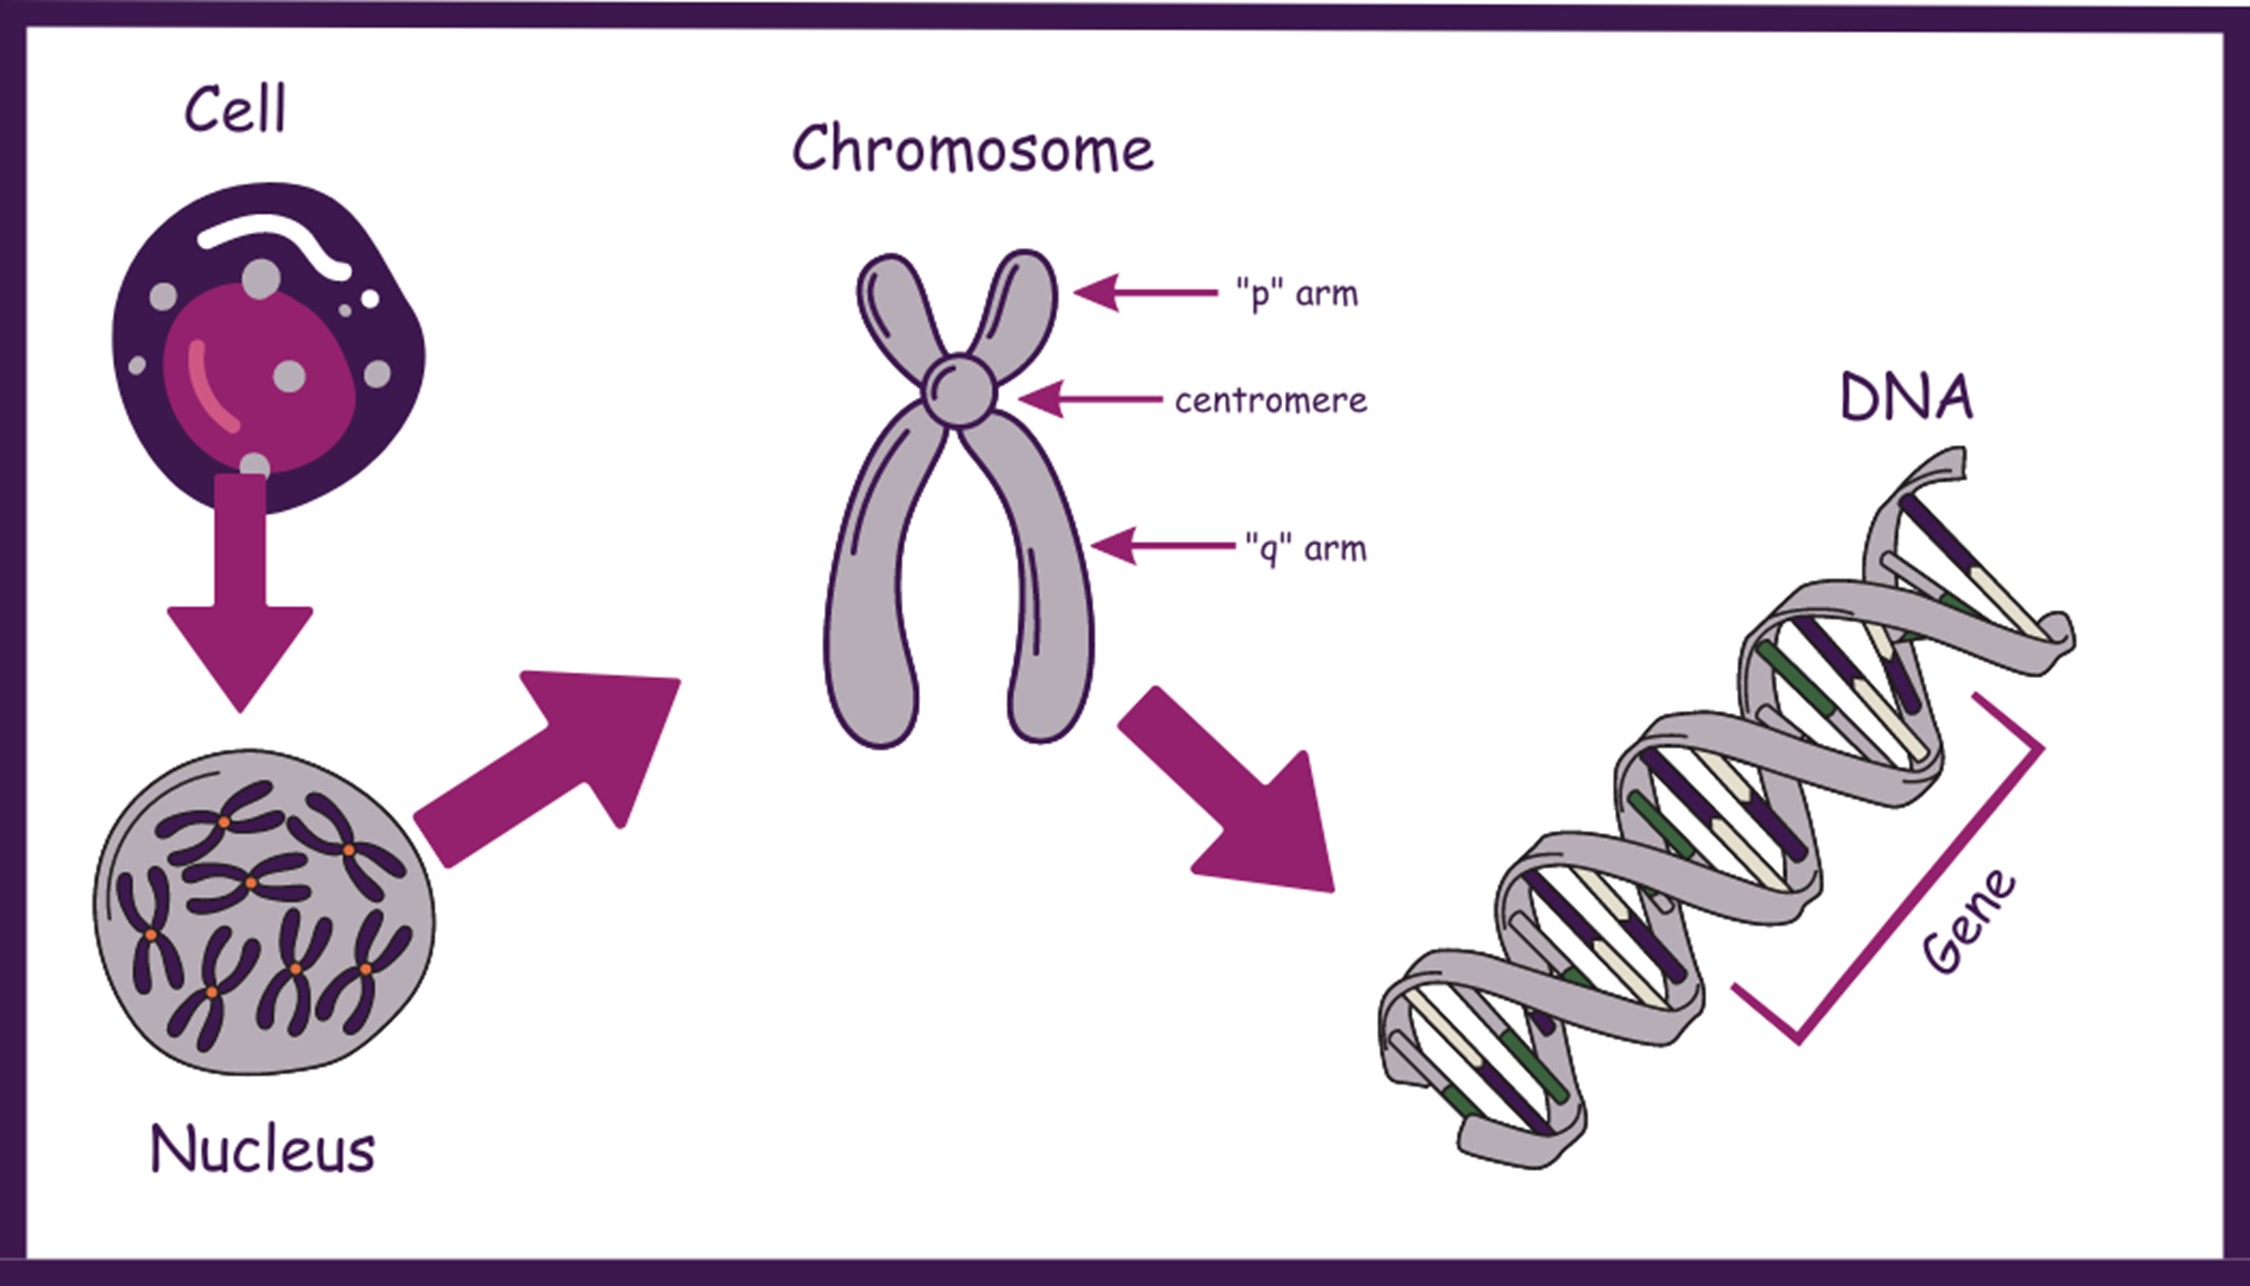 Inverted Y Chromosome image showing the sections of a chromosome, gene, nucleus and cell.